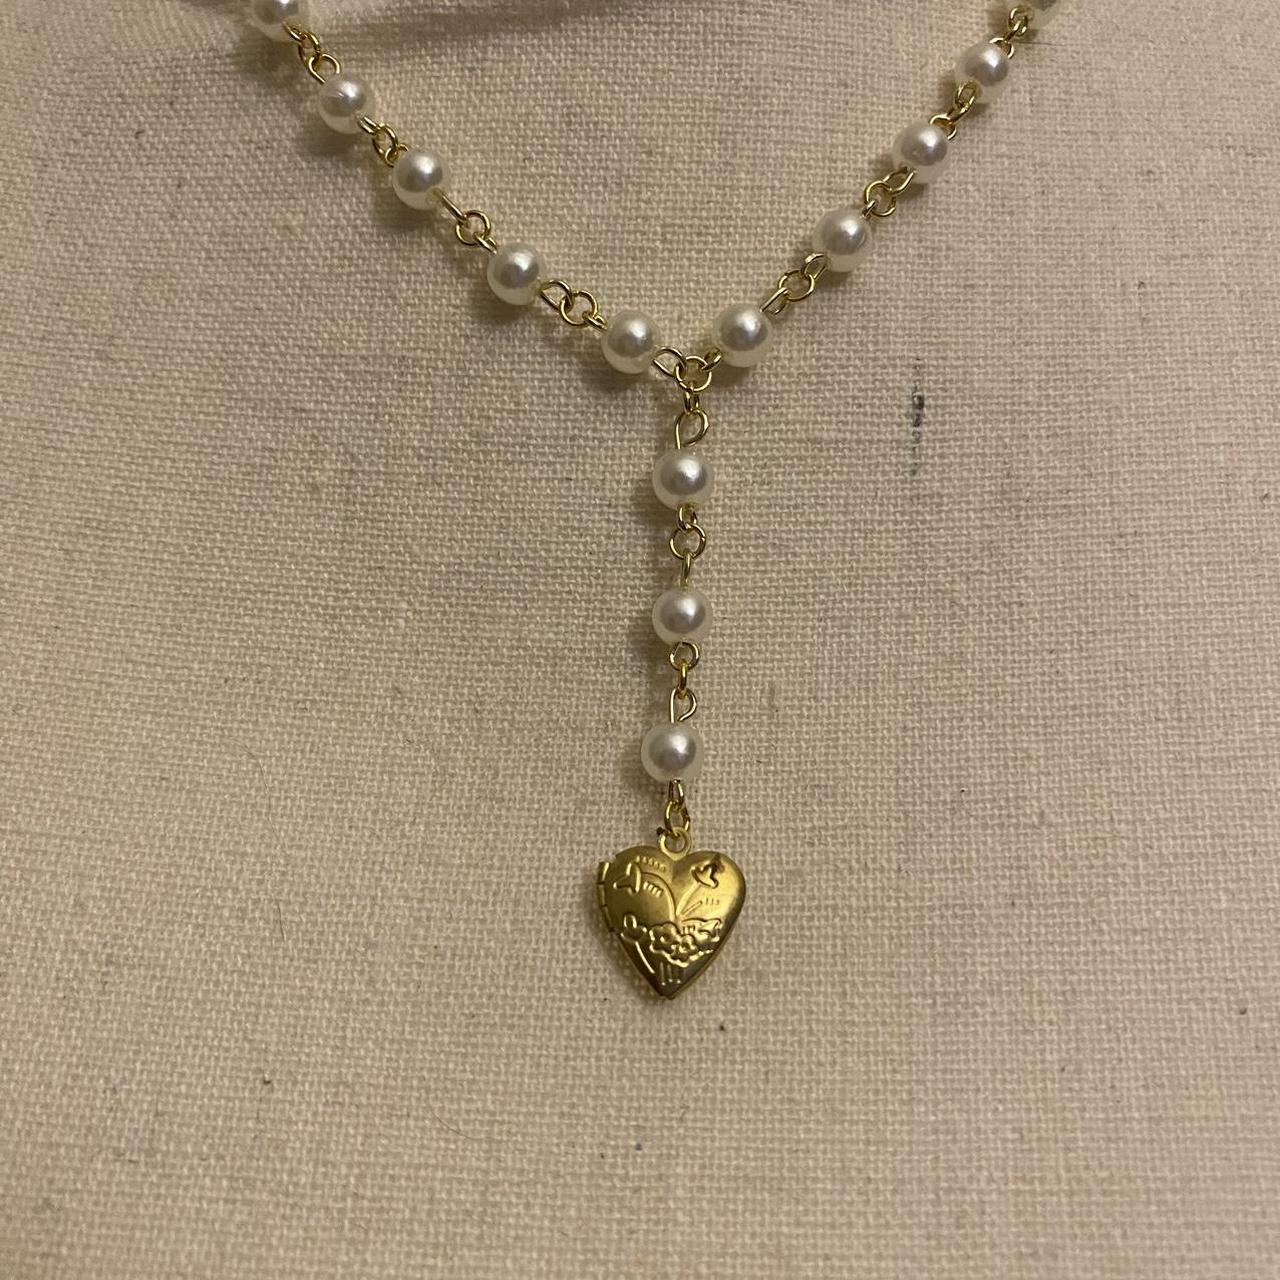 Beautiful gold pearl beaded necklace with gold heart... - Depop